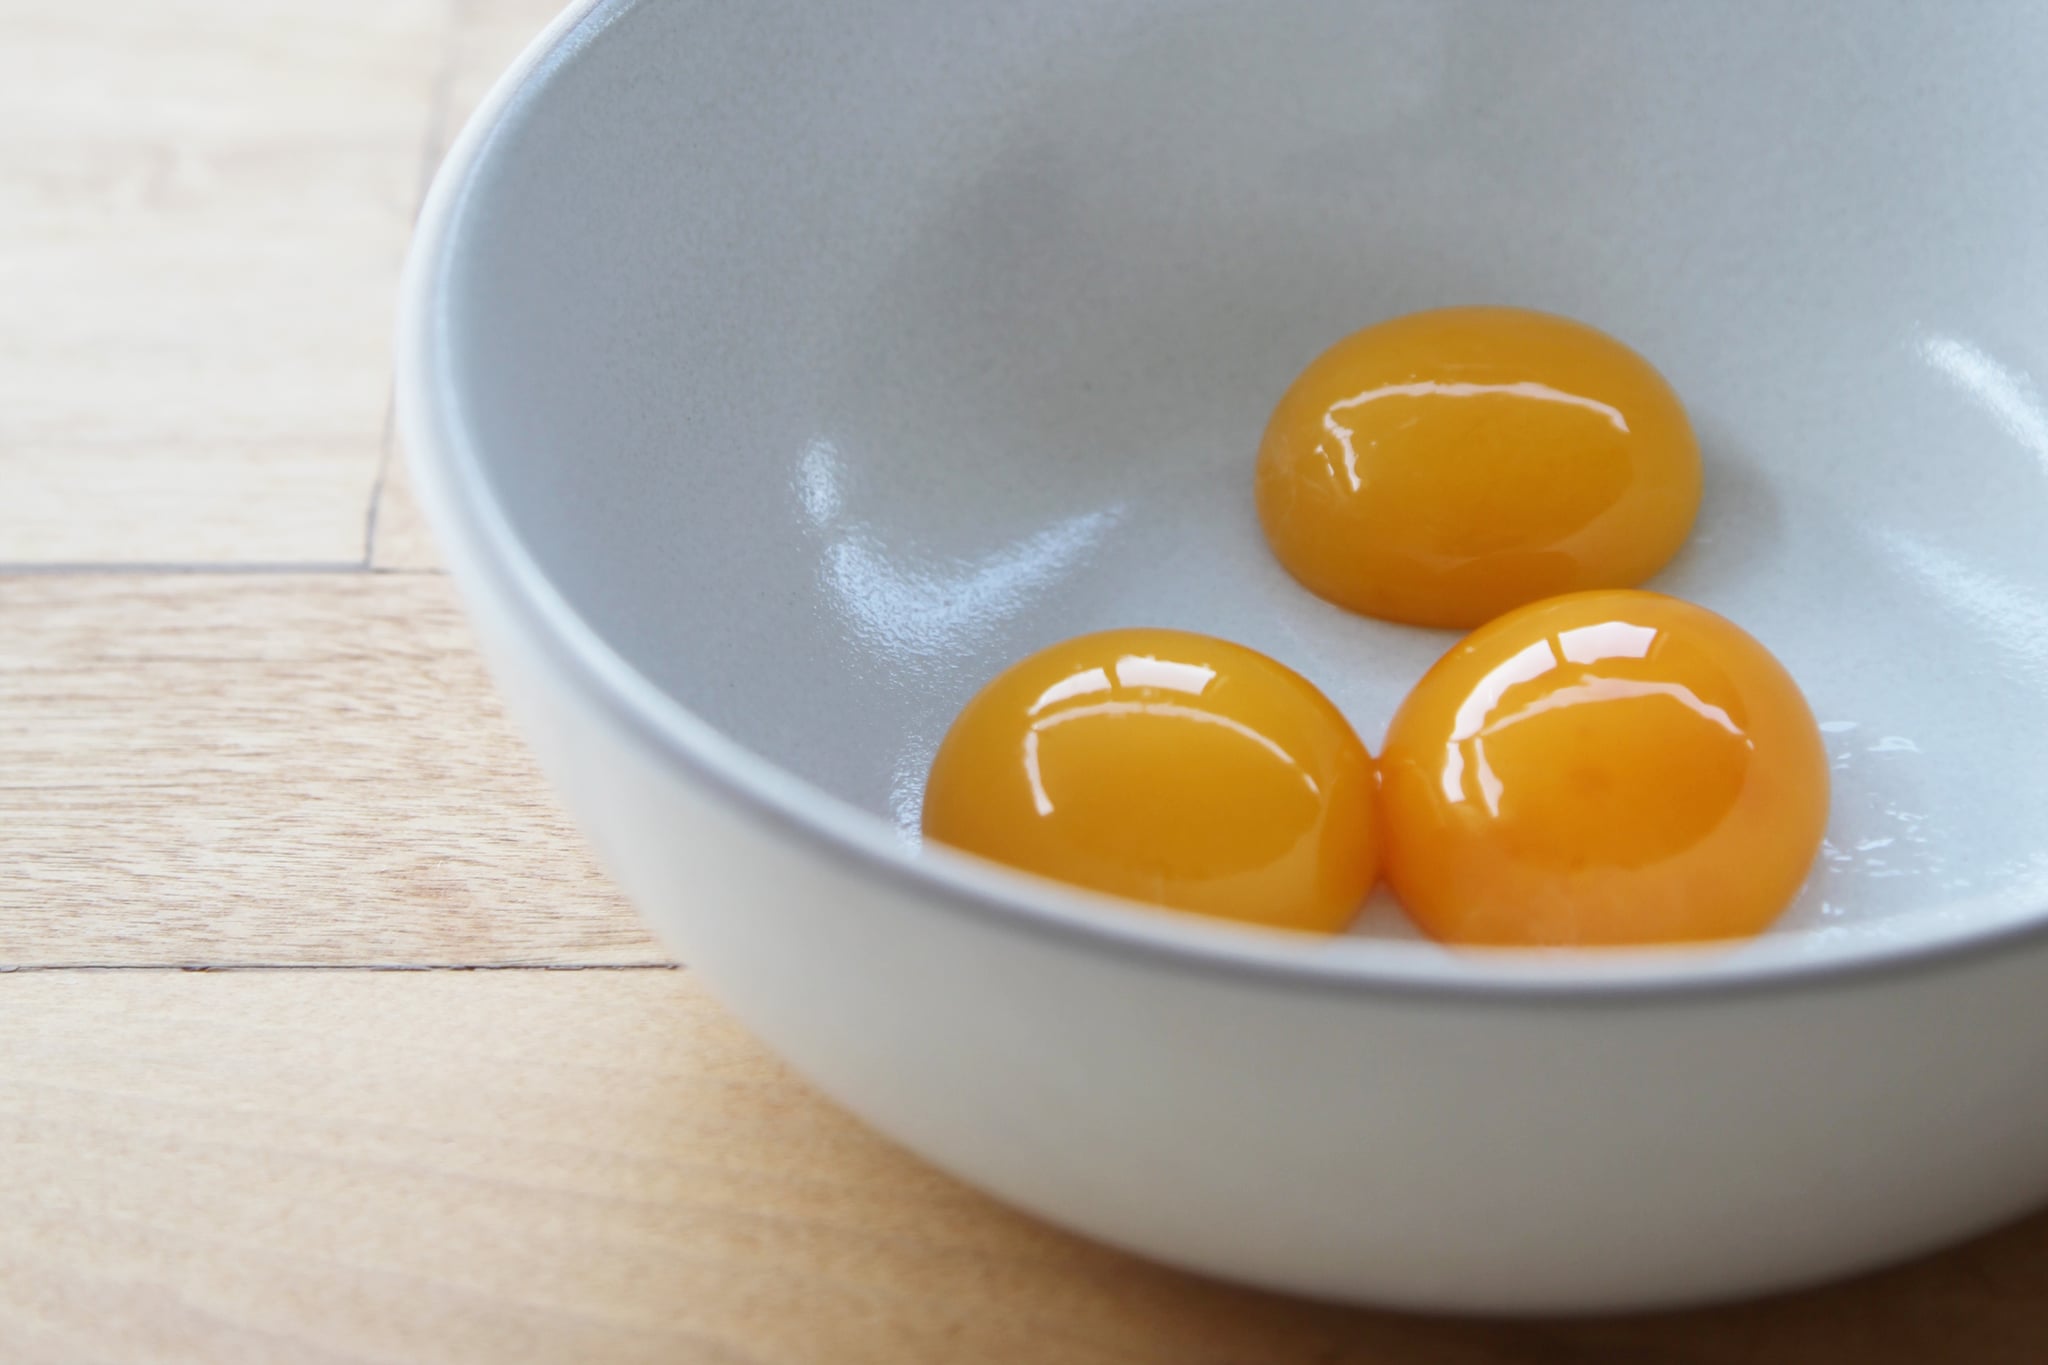 The Ingenious Hack For Separating Egg Yolks and Whites Using a Water Bottle...